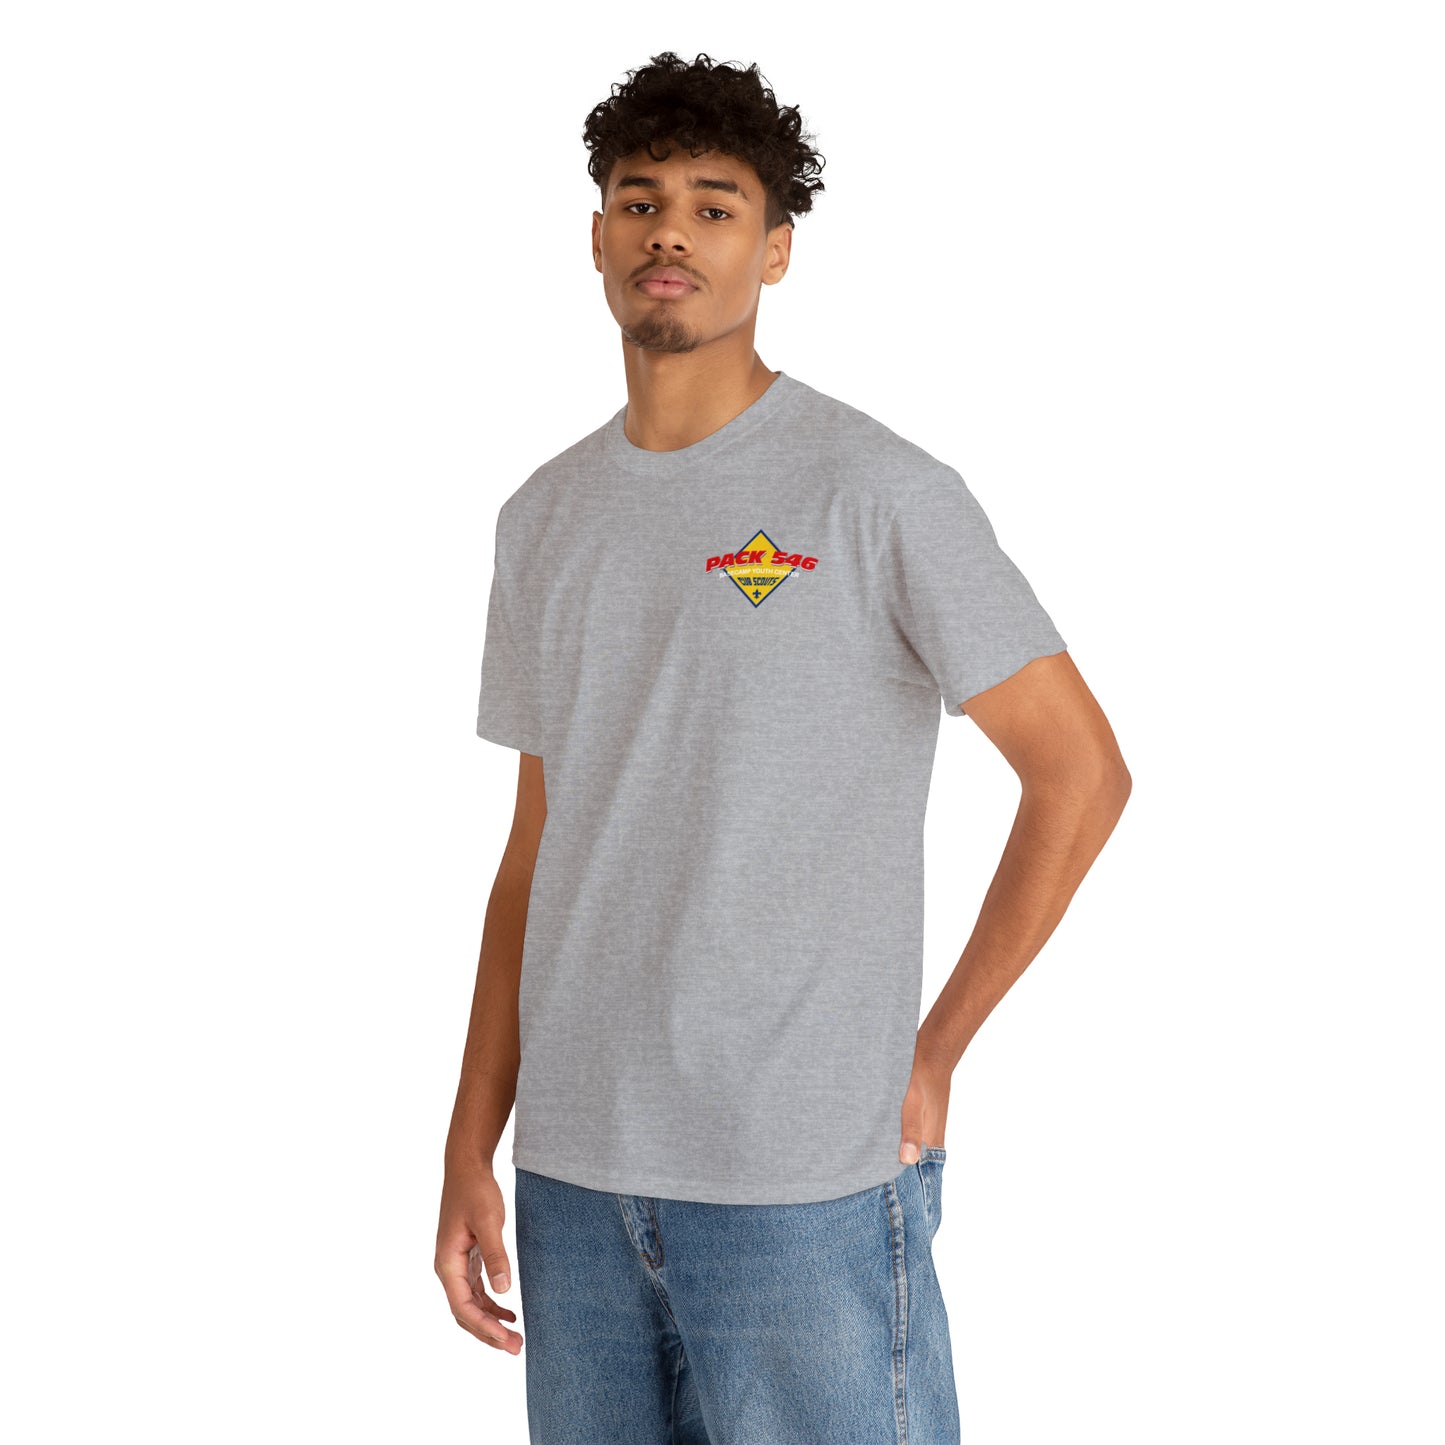 Pack 546 - Adult Cotton Tee